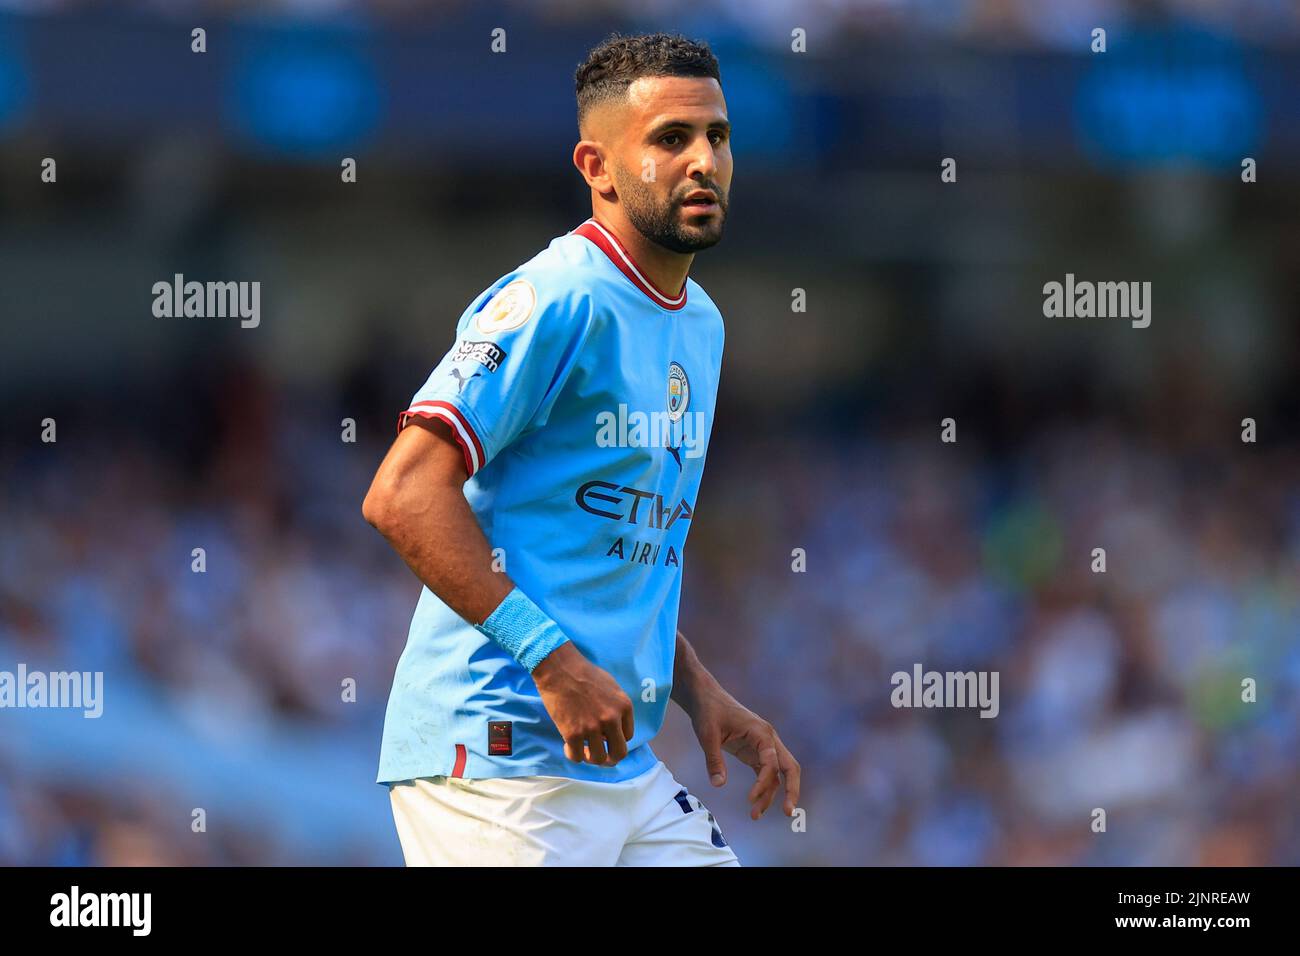 Manchester, UK. 13th Aug, 2022. Riyad Mahrez #26 of Manchester City in Manchester, United Kingdom on 8/13/2022. (Photo by Conor Molloy/News Images/Sipa USA) Credit: Sipa USA/Alamy Live News Stock Photo